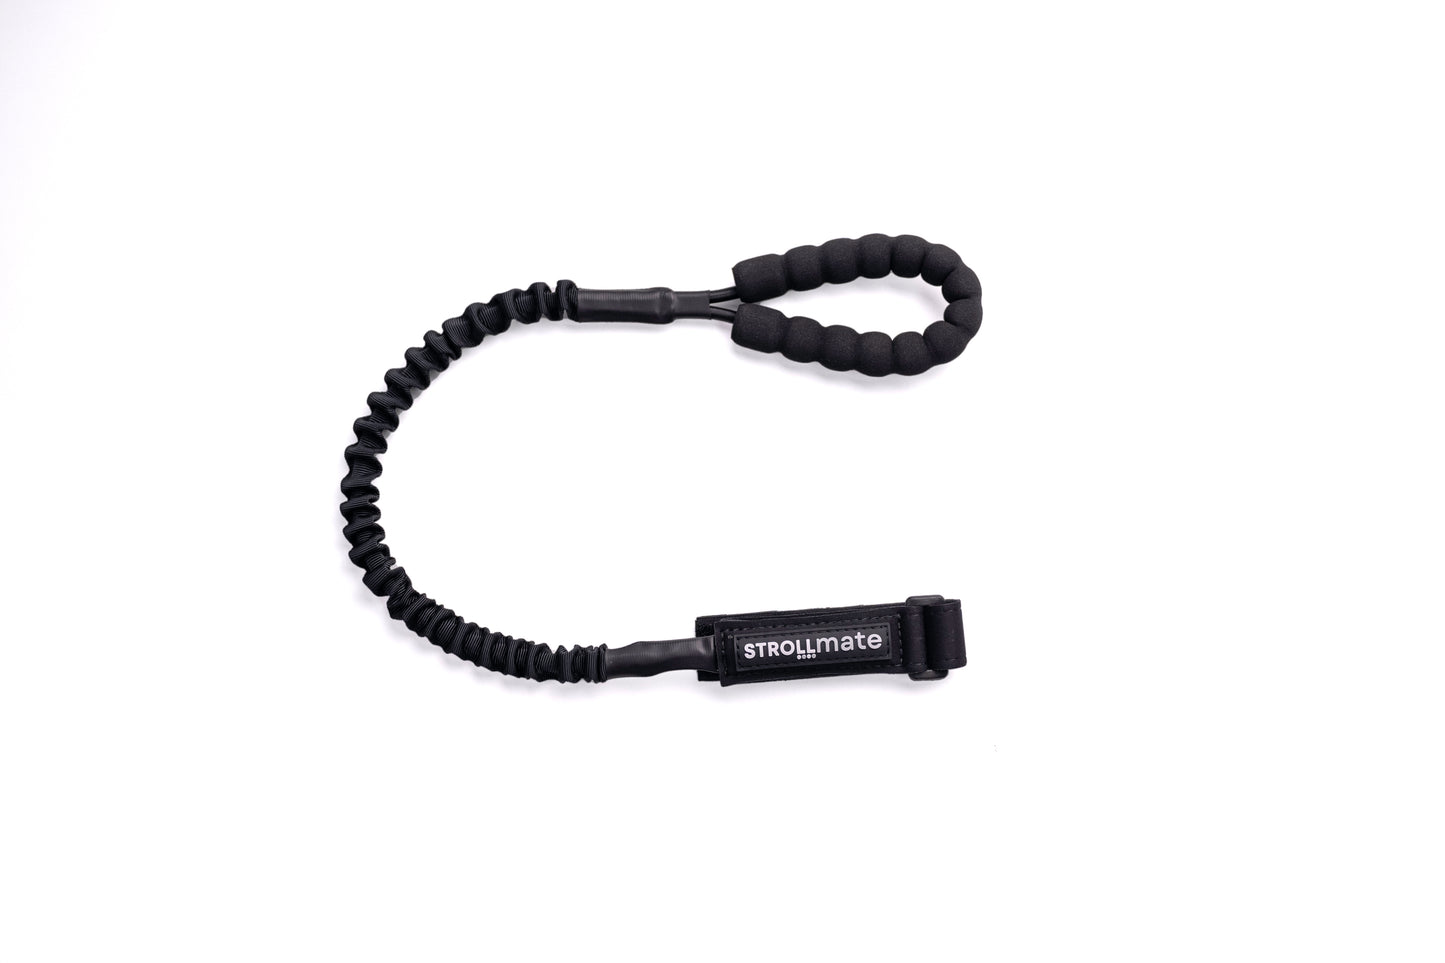 Strollmate Stroller Accessory | Adjustable Strap Attaches To Strollers, Wagons, Diaper Bags